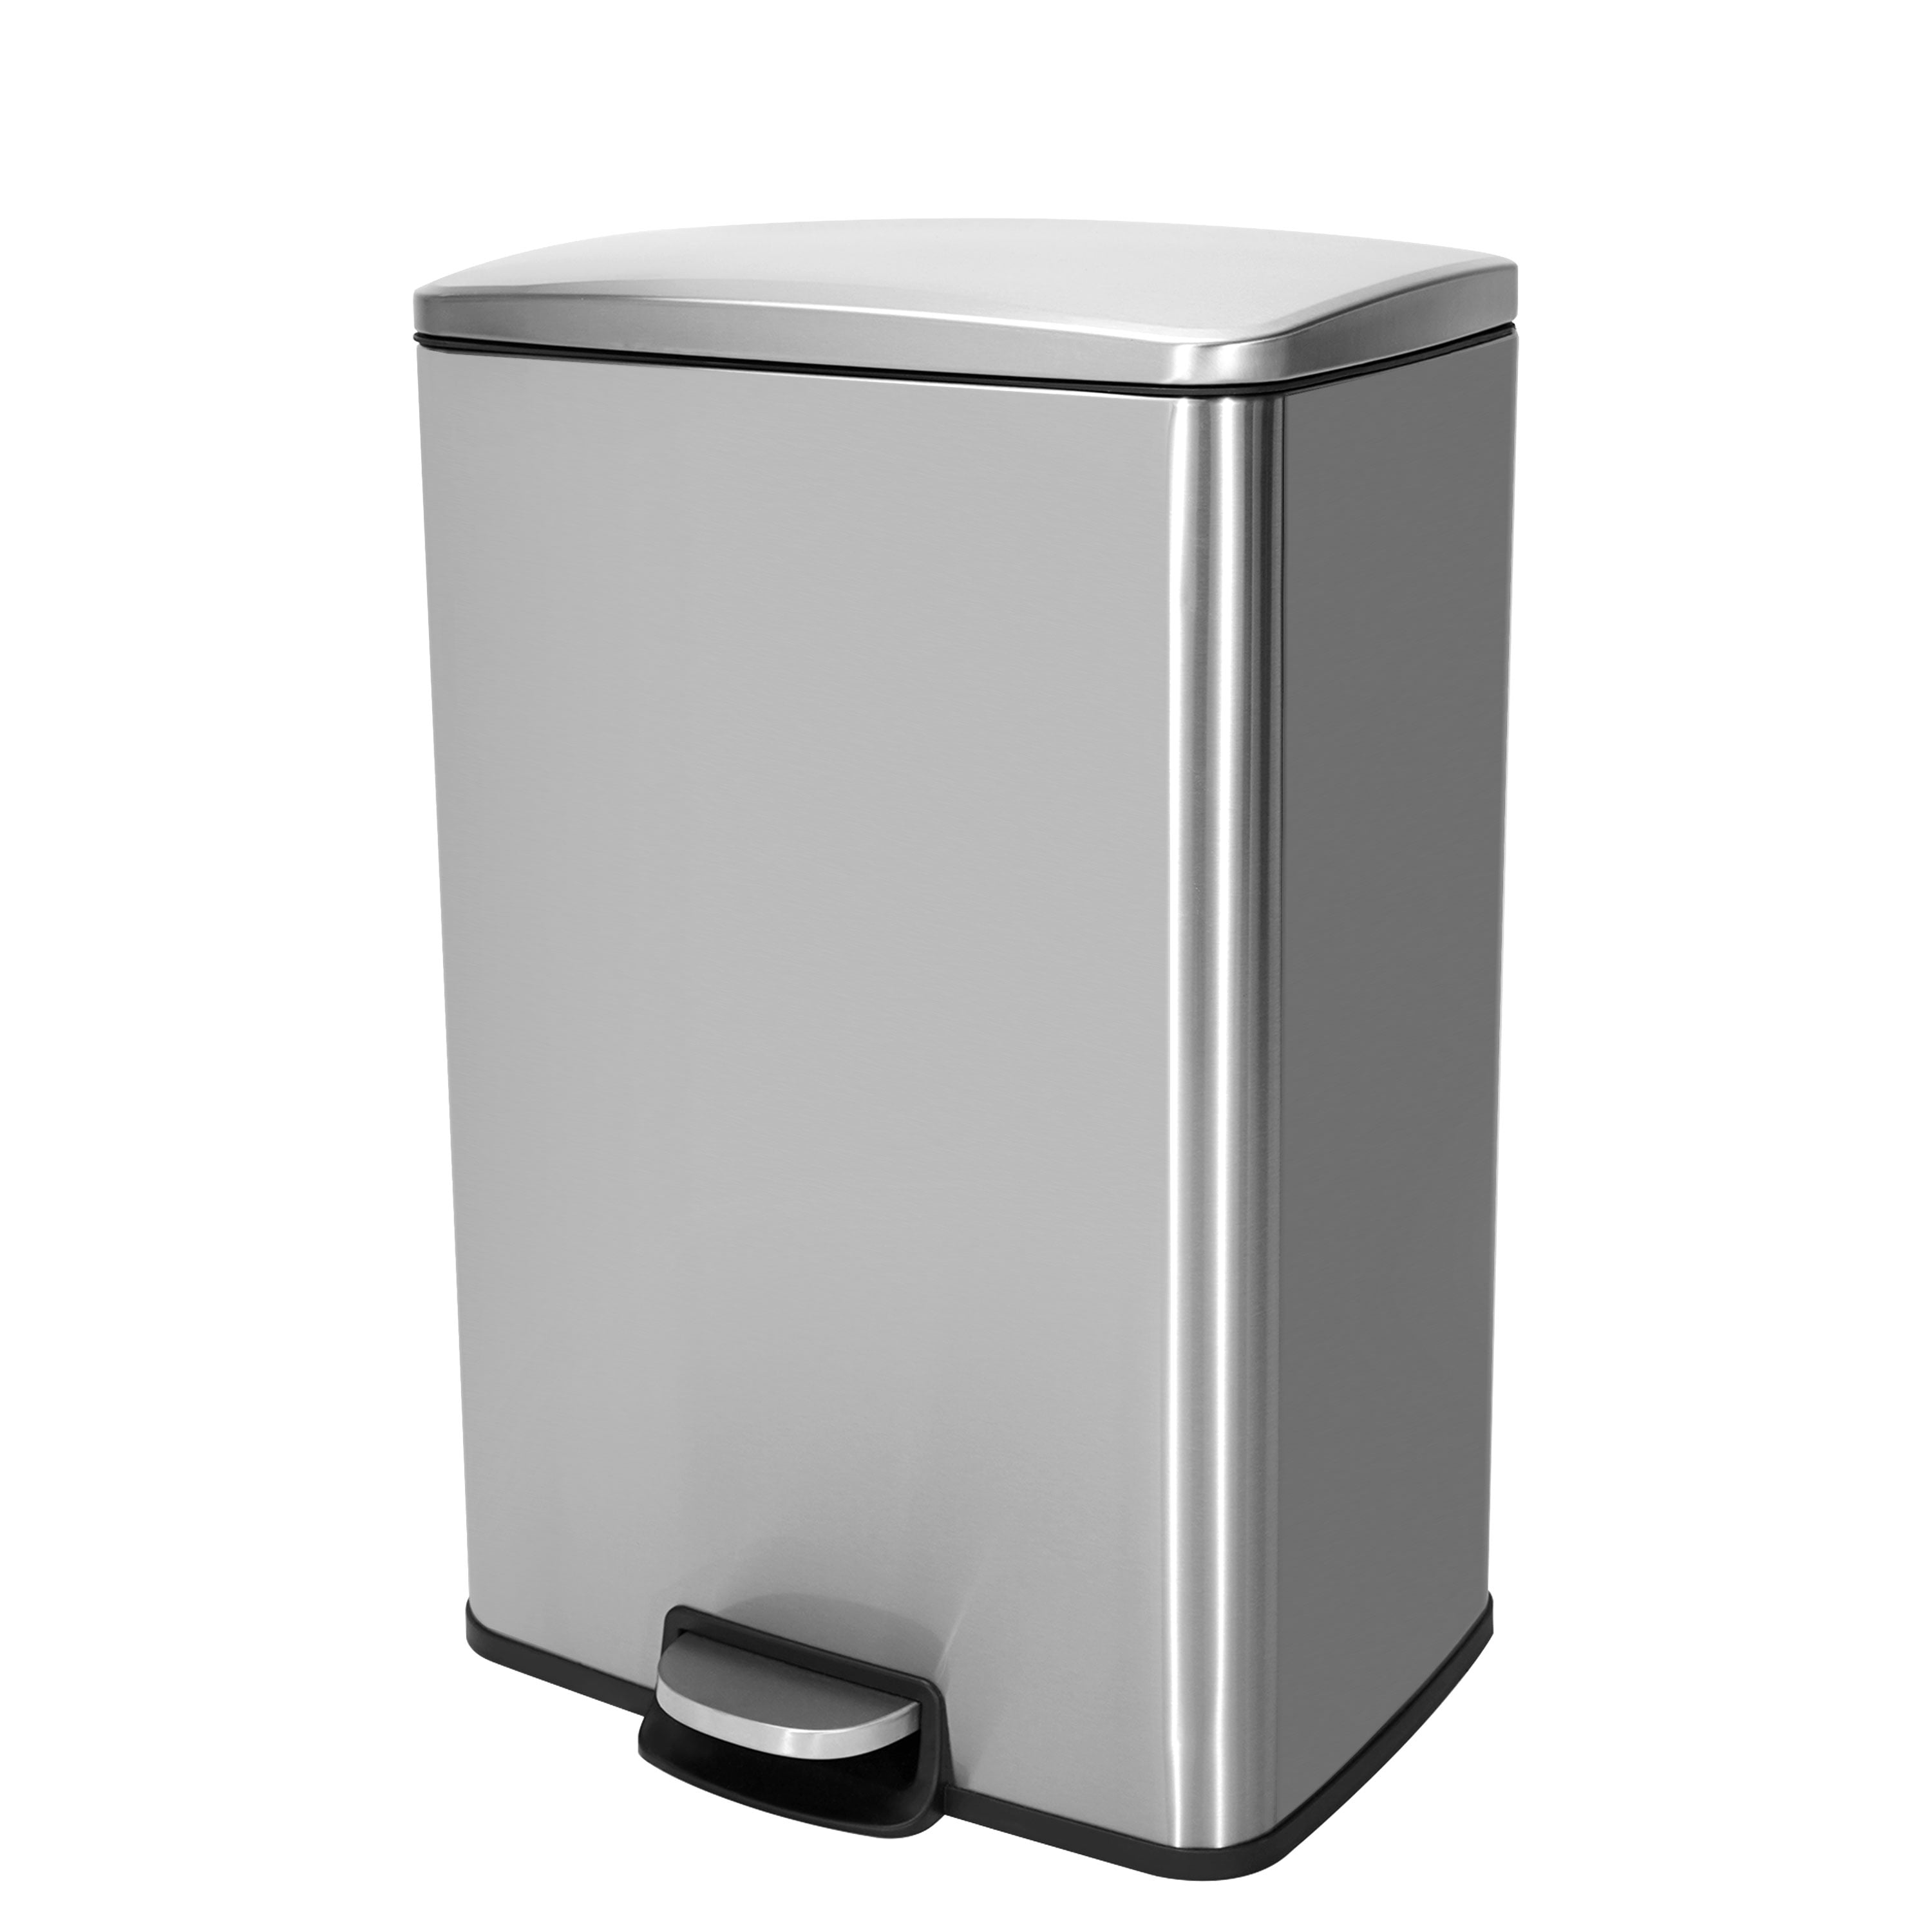 Innovaze 13 Gallon Stainless Steel Step Rectangular Kitchen Trash Can Stainless Steel 13 Gallon Step On Trash Can